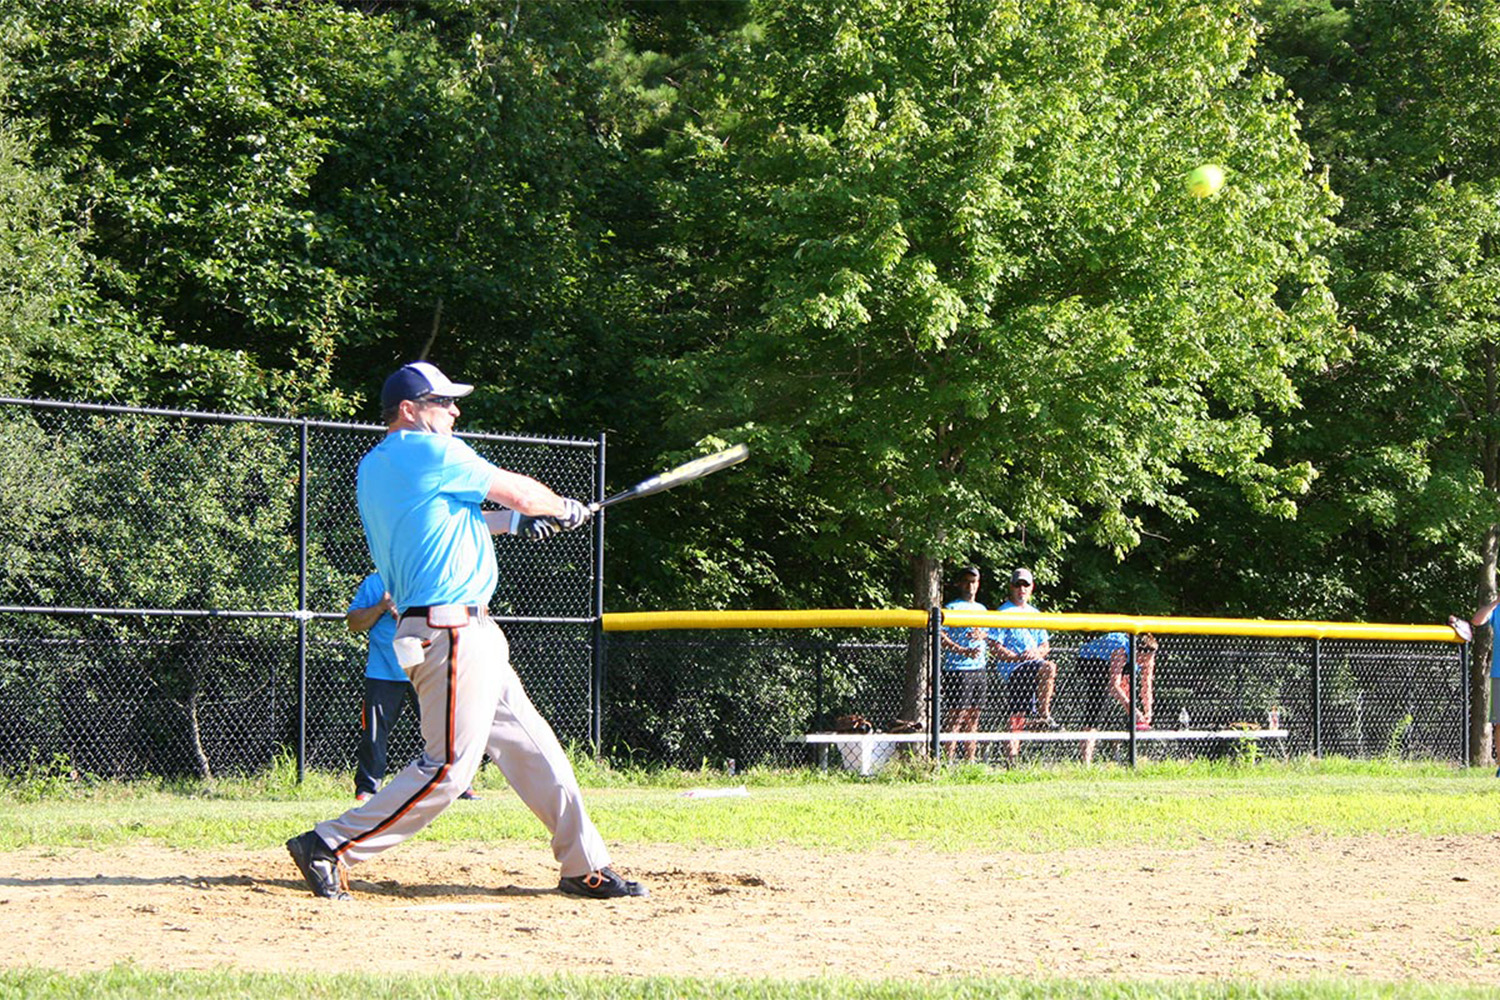 Peter at first base, batting the ball 